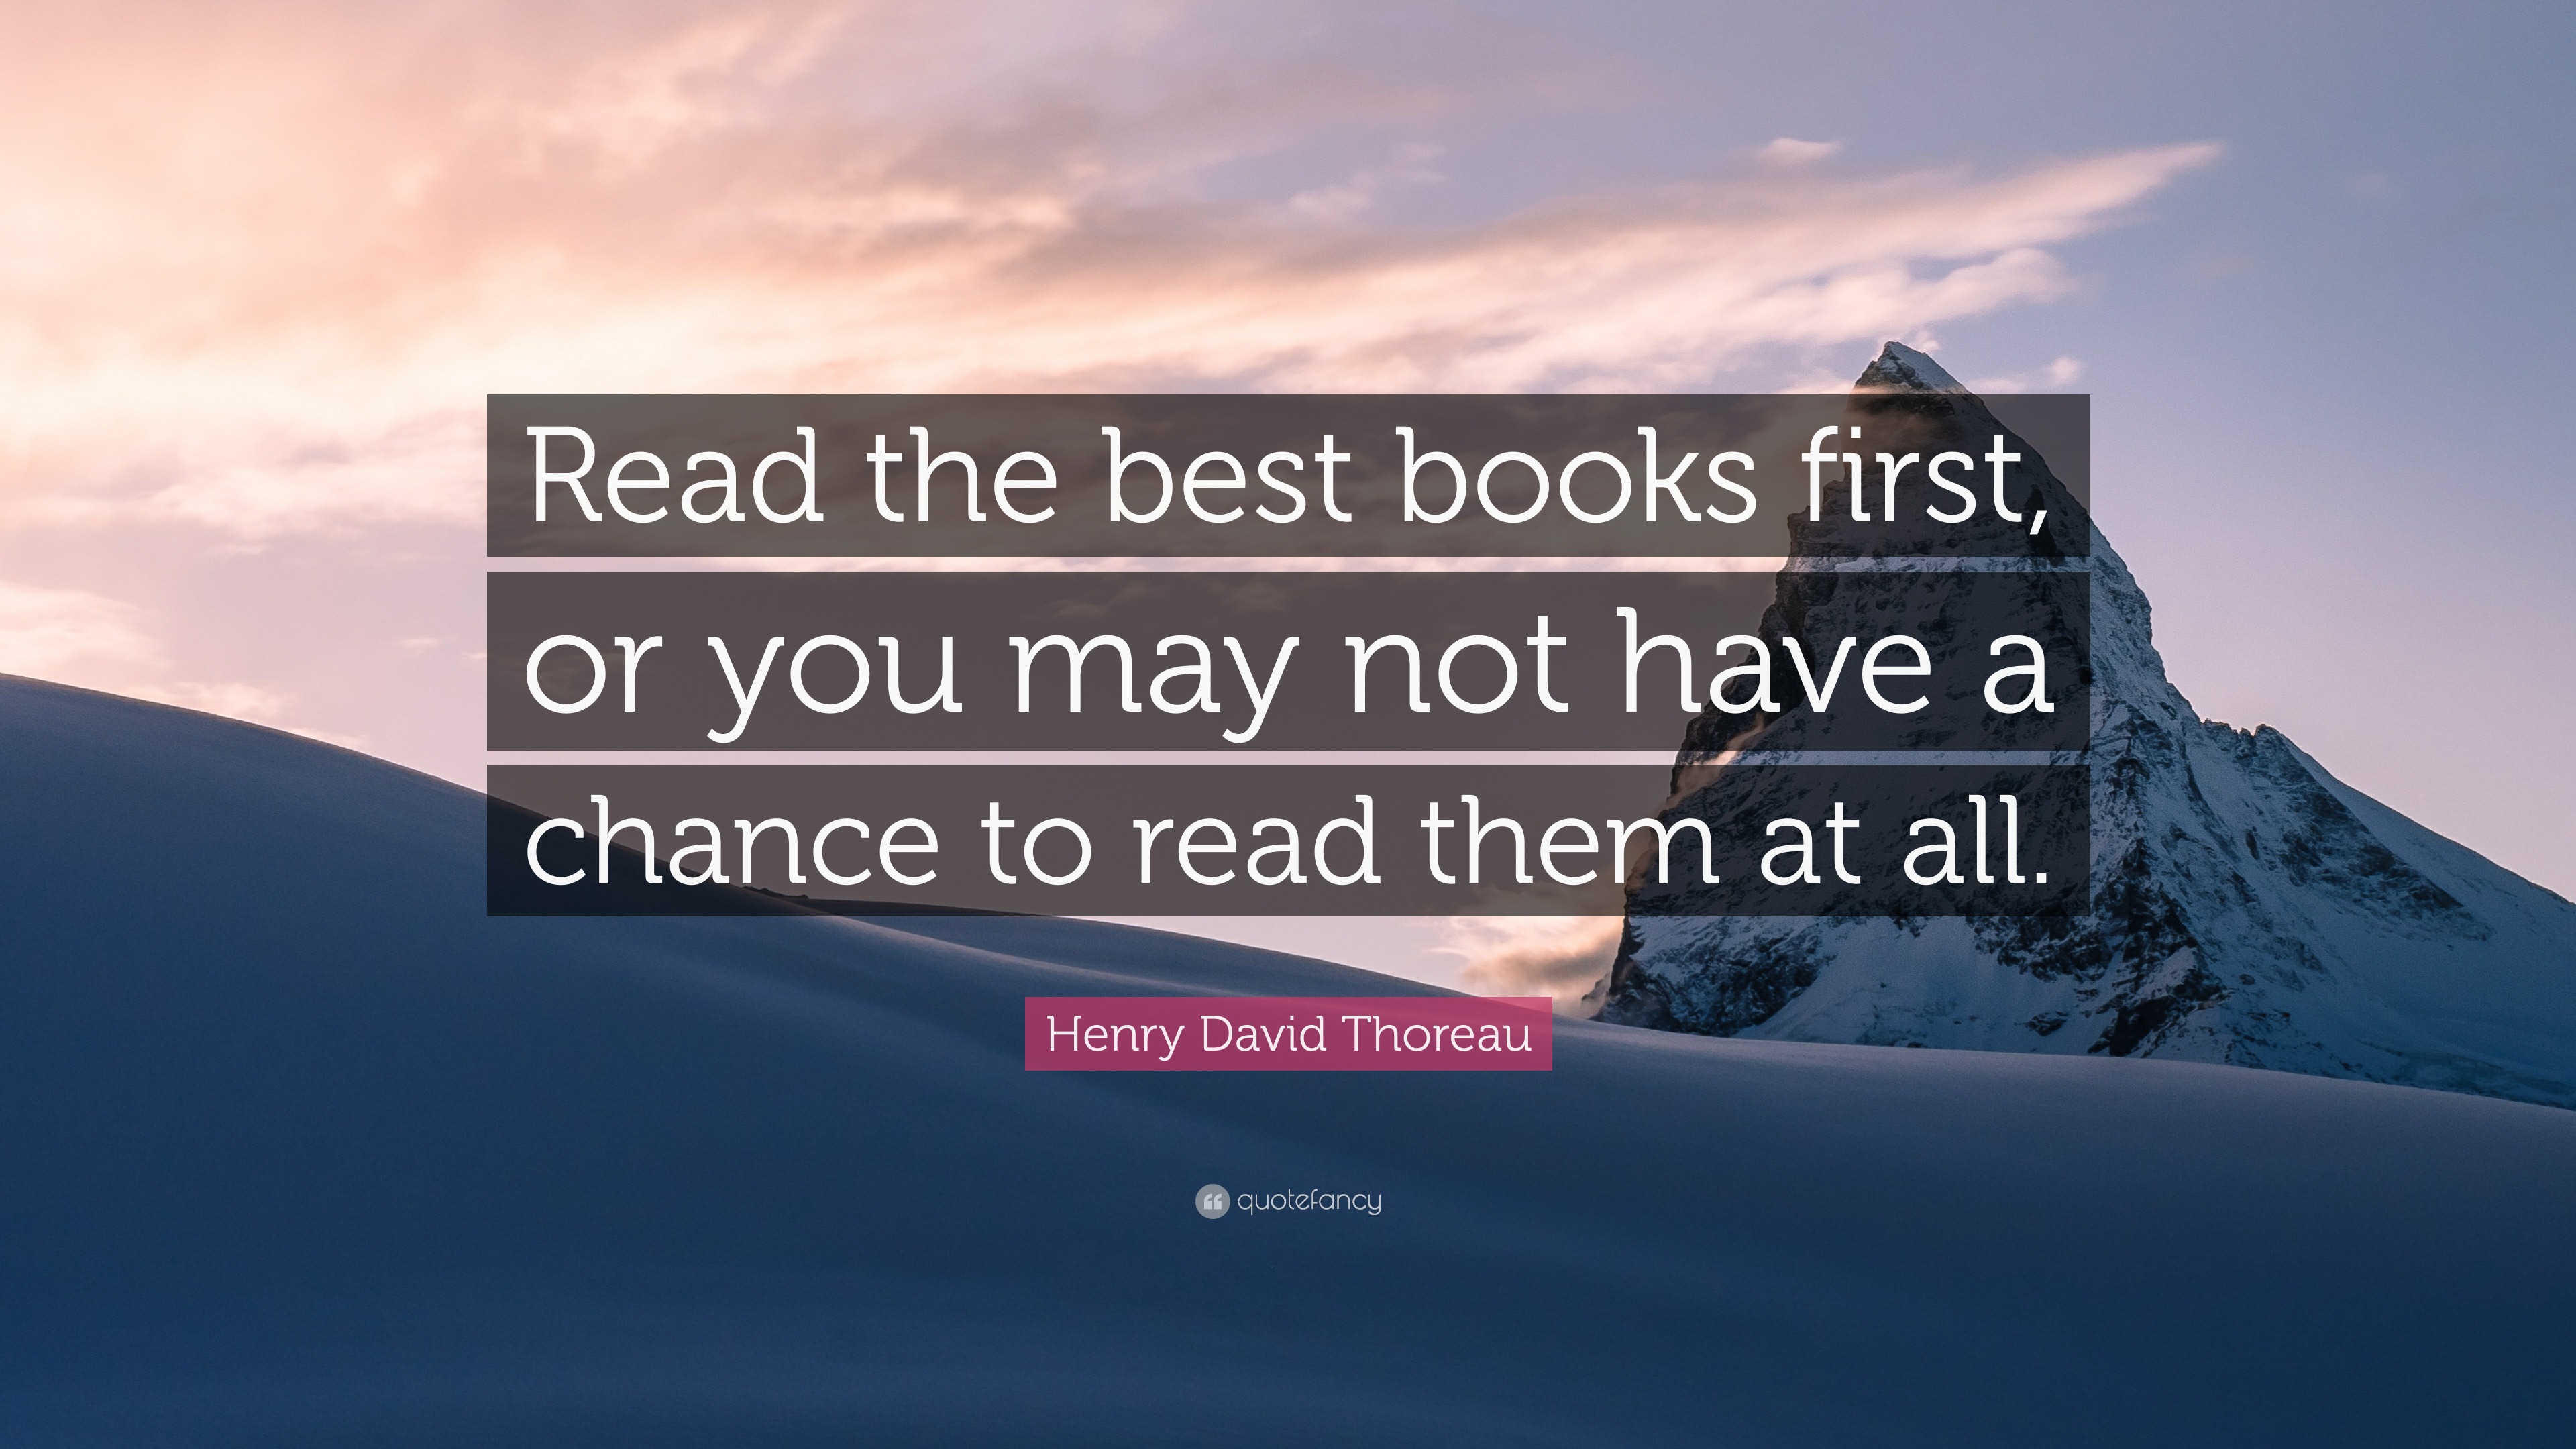 Henry David Thoreau Quote: “Read the best books first, or you may not ...